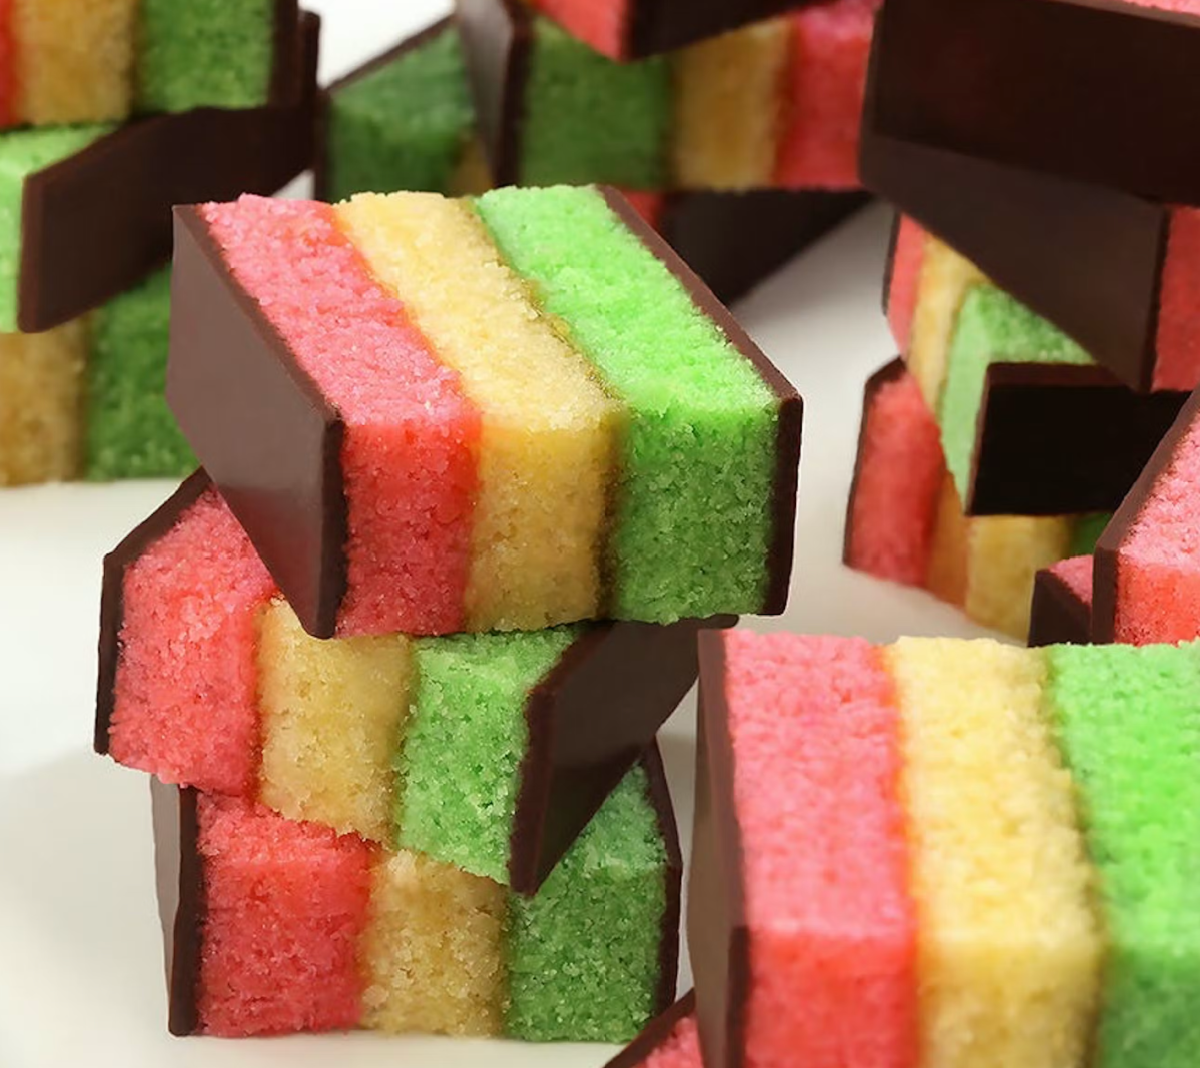 A stack of rainbow cookies from Ferrara Bakery